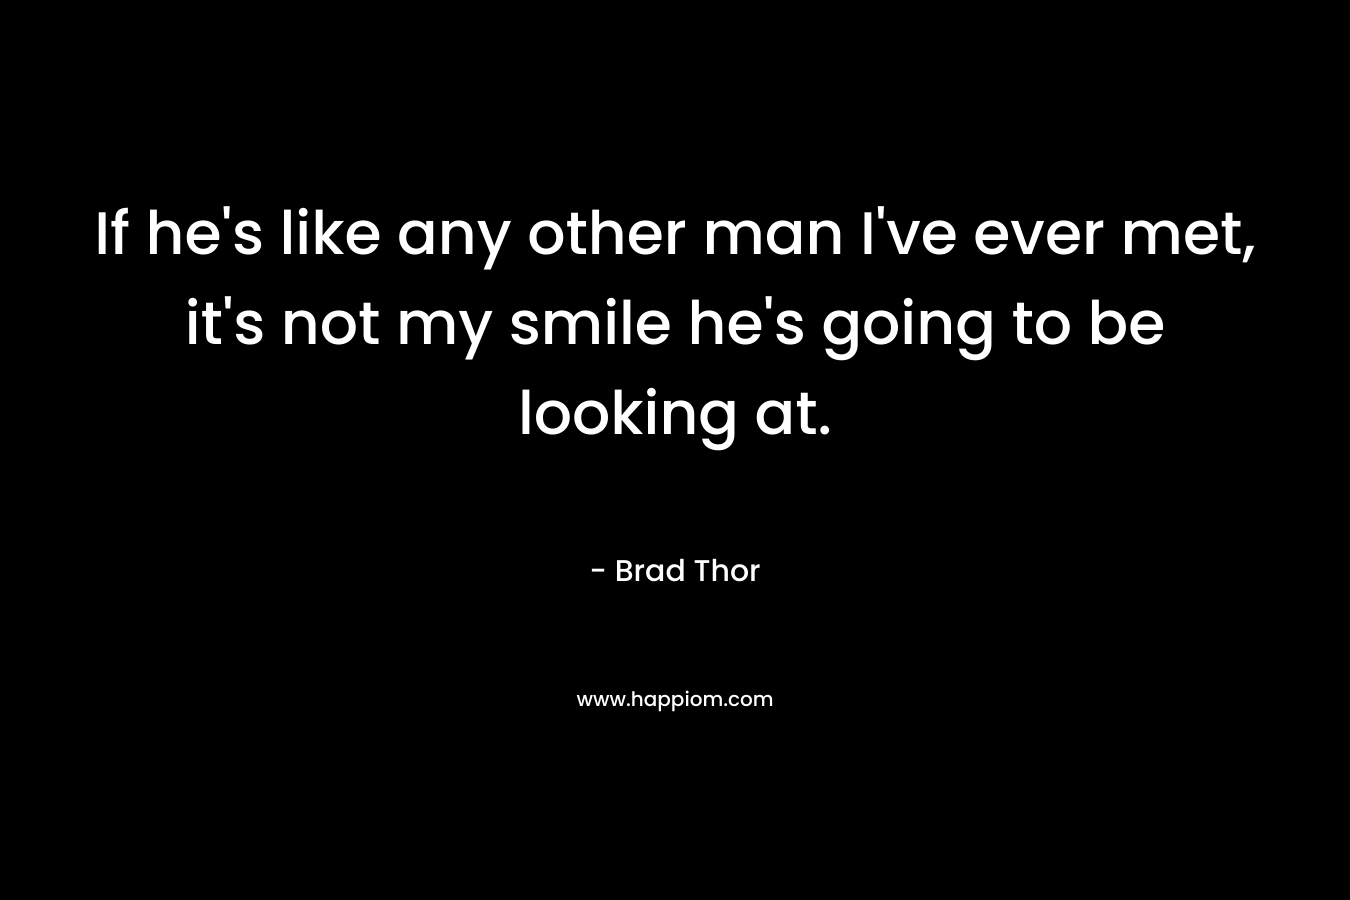 If he's like any other man I've ever met, it's not my smile he's going to be looking at.